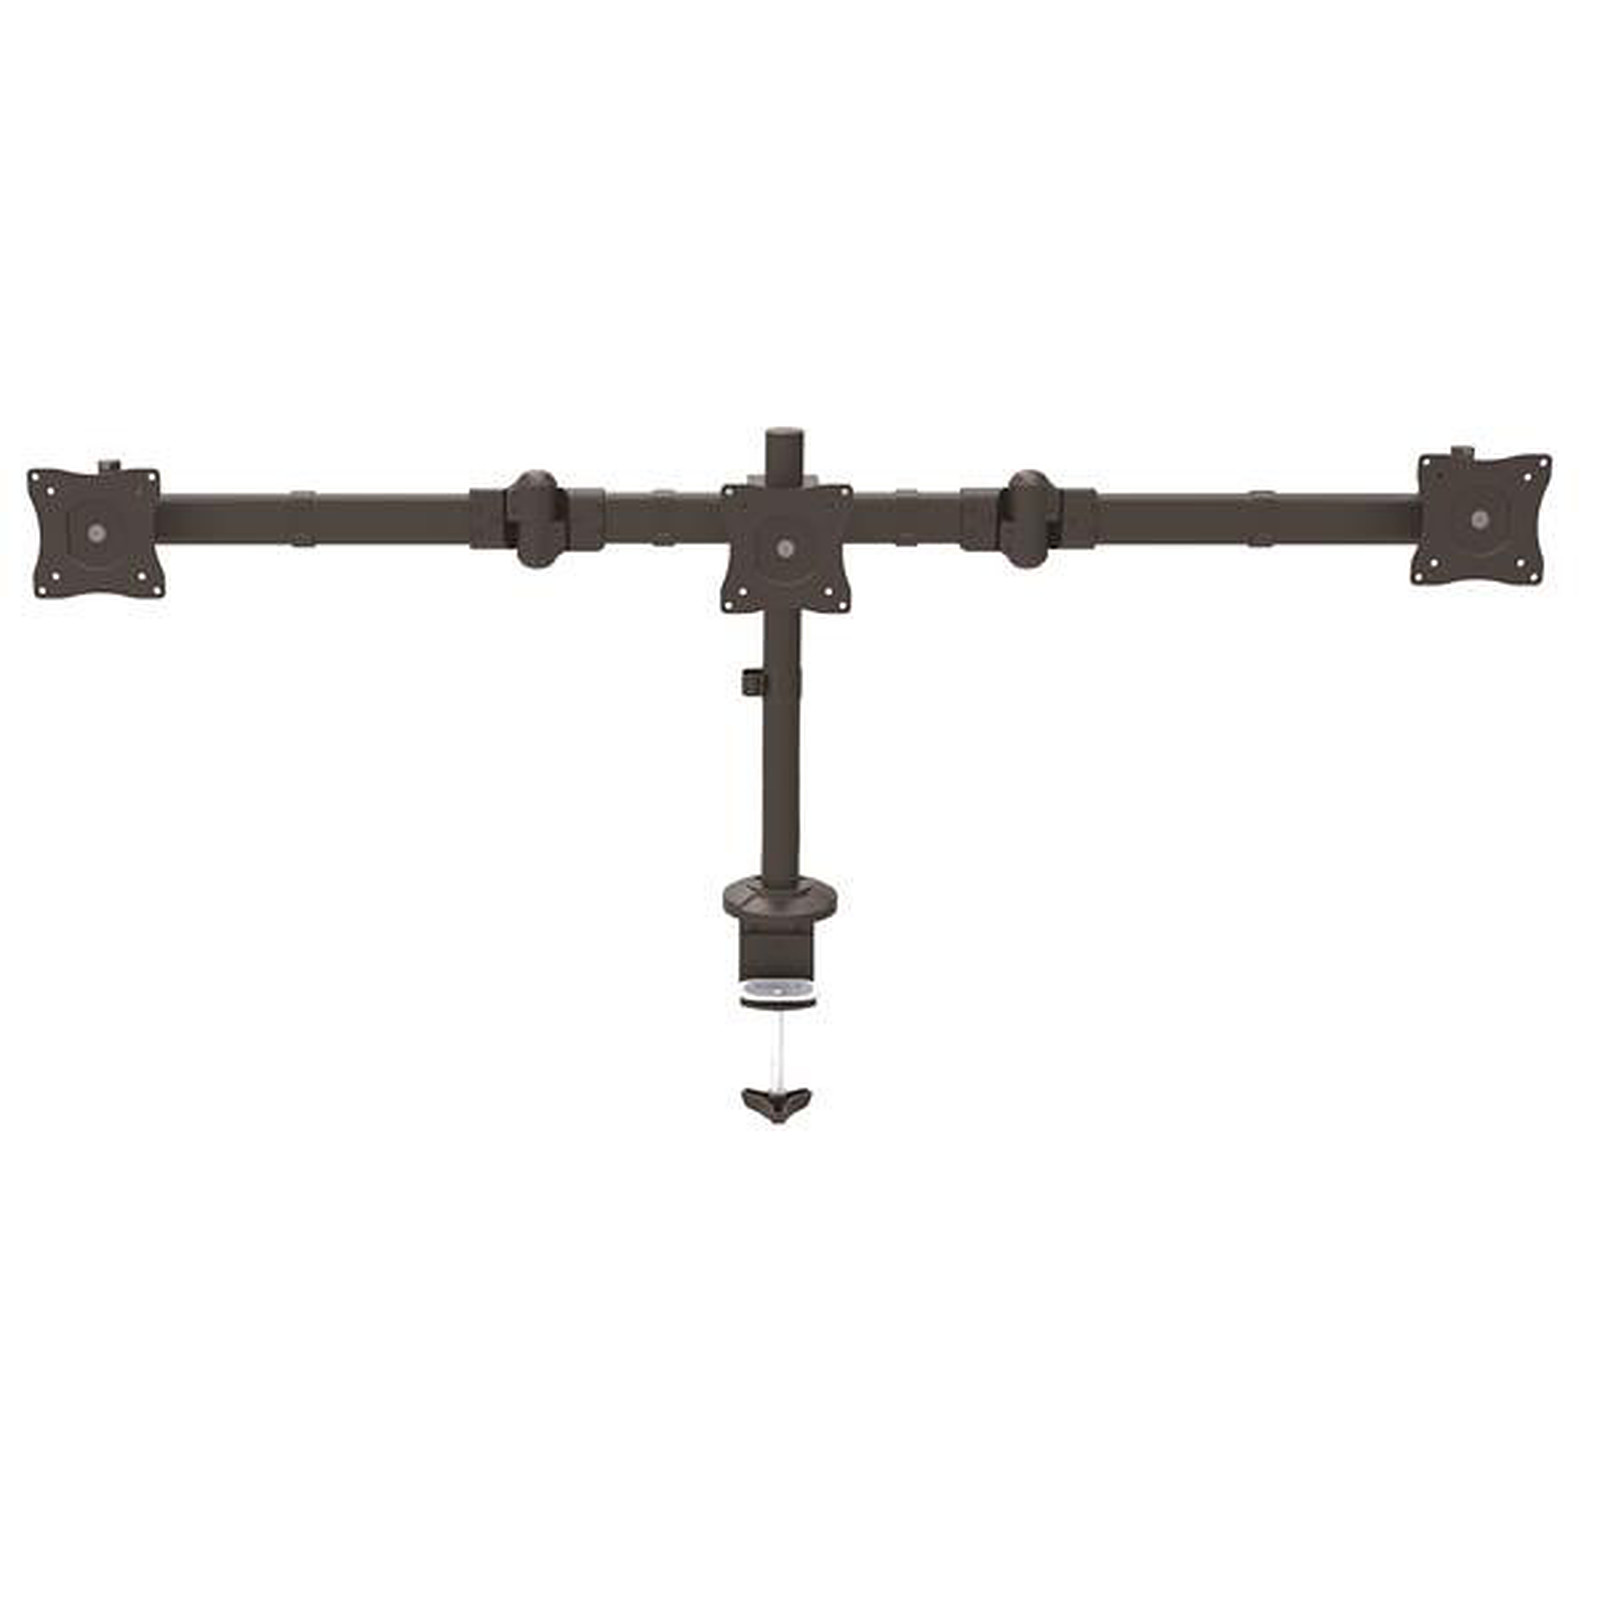 Startech ARMTRIO Desk-Mount Triple Monitor Arm - Articulating for up to 24” Monitors - image 1 of 7